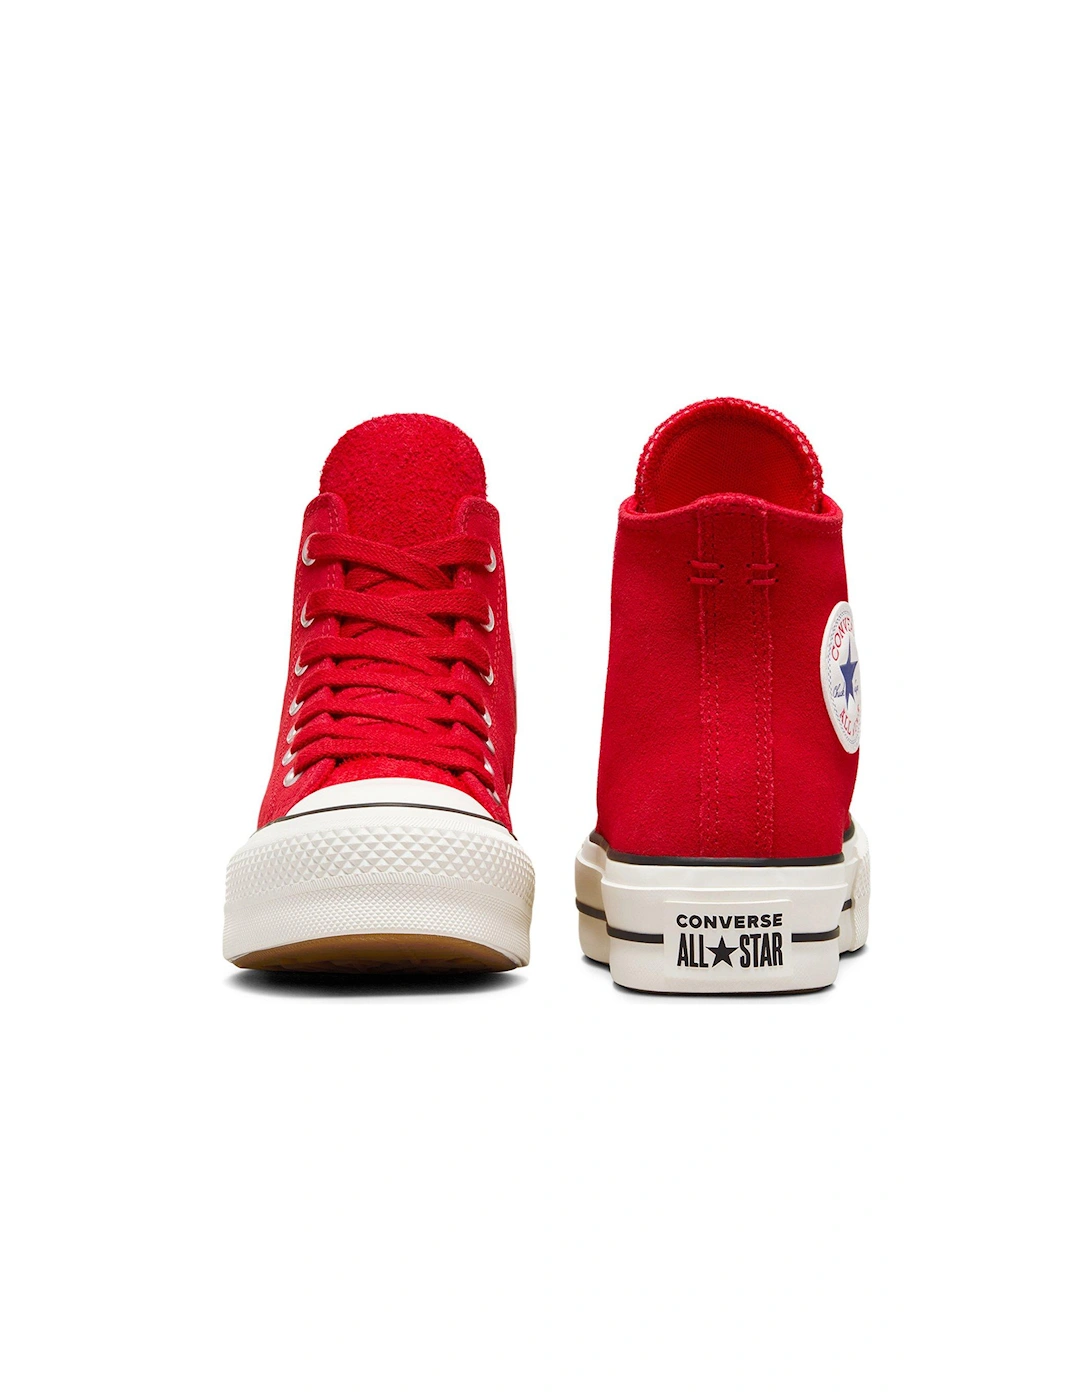 Womens Lift Suede Hi Top Trainers - Red